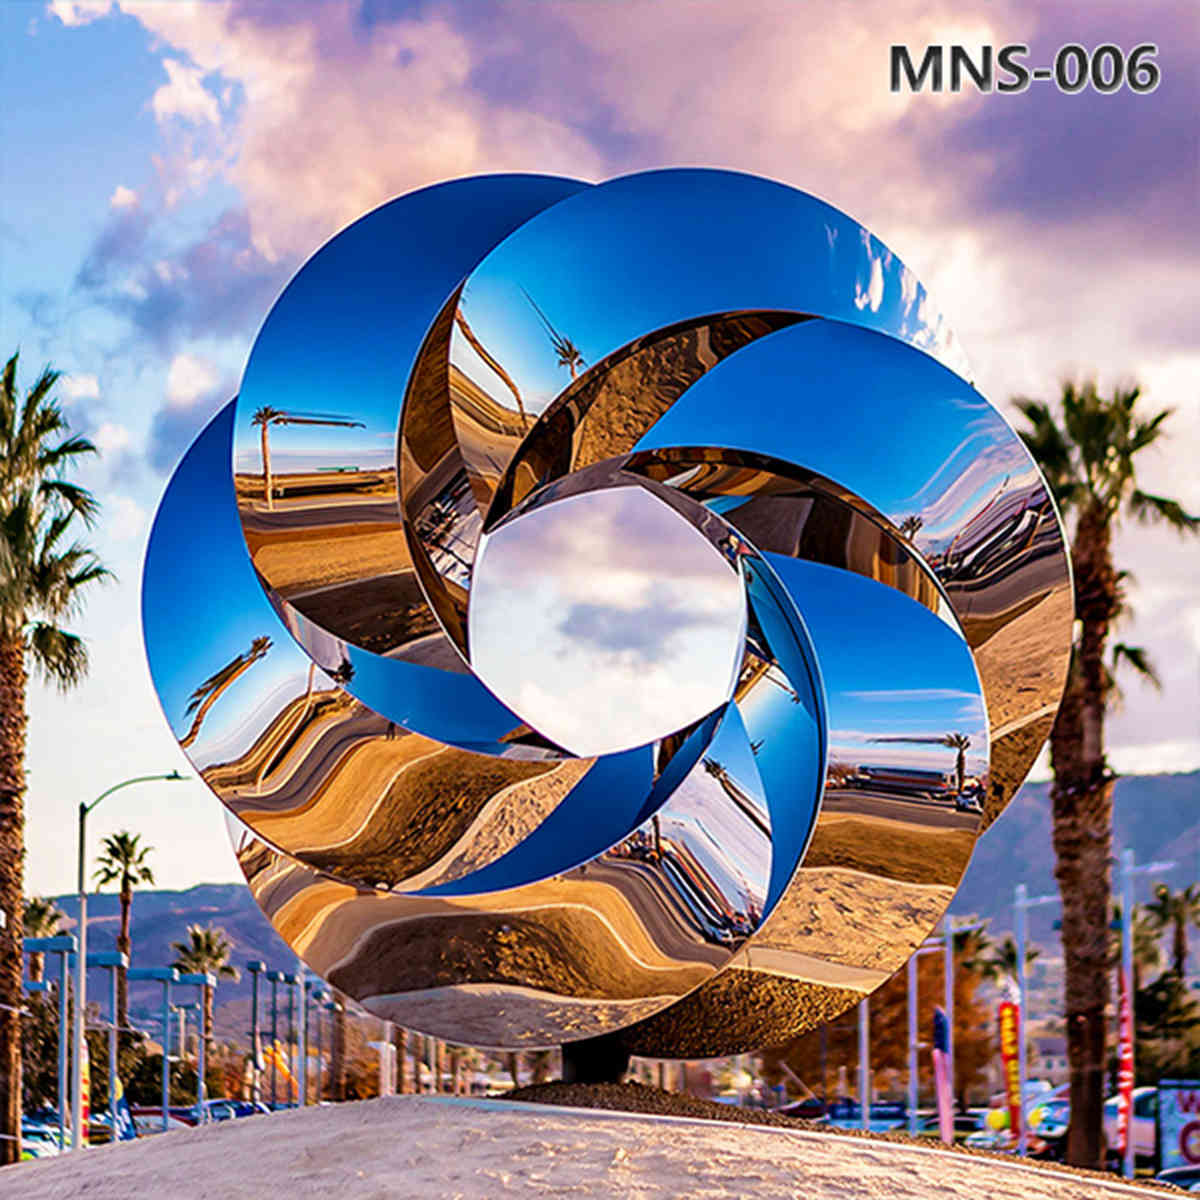 Large Mirror Polished Stainless Steel Sculpture Public Artwork MNS-006